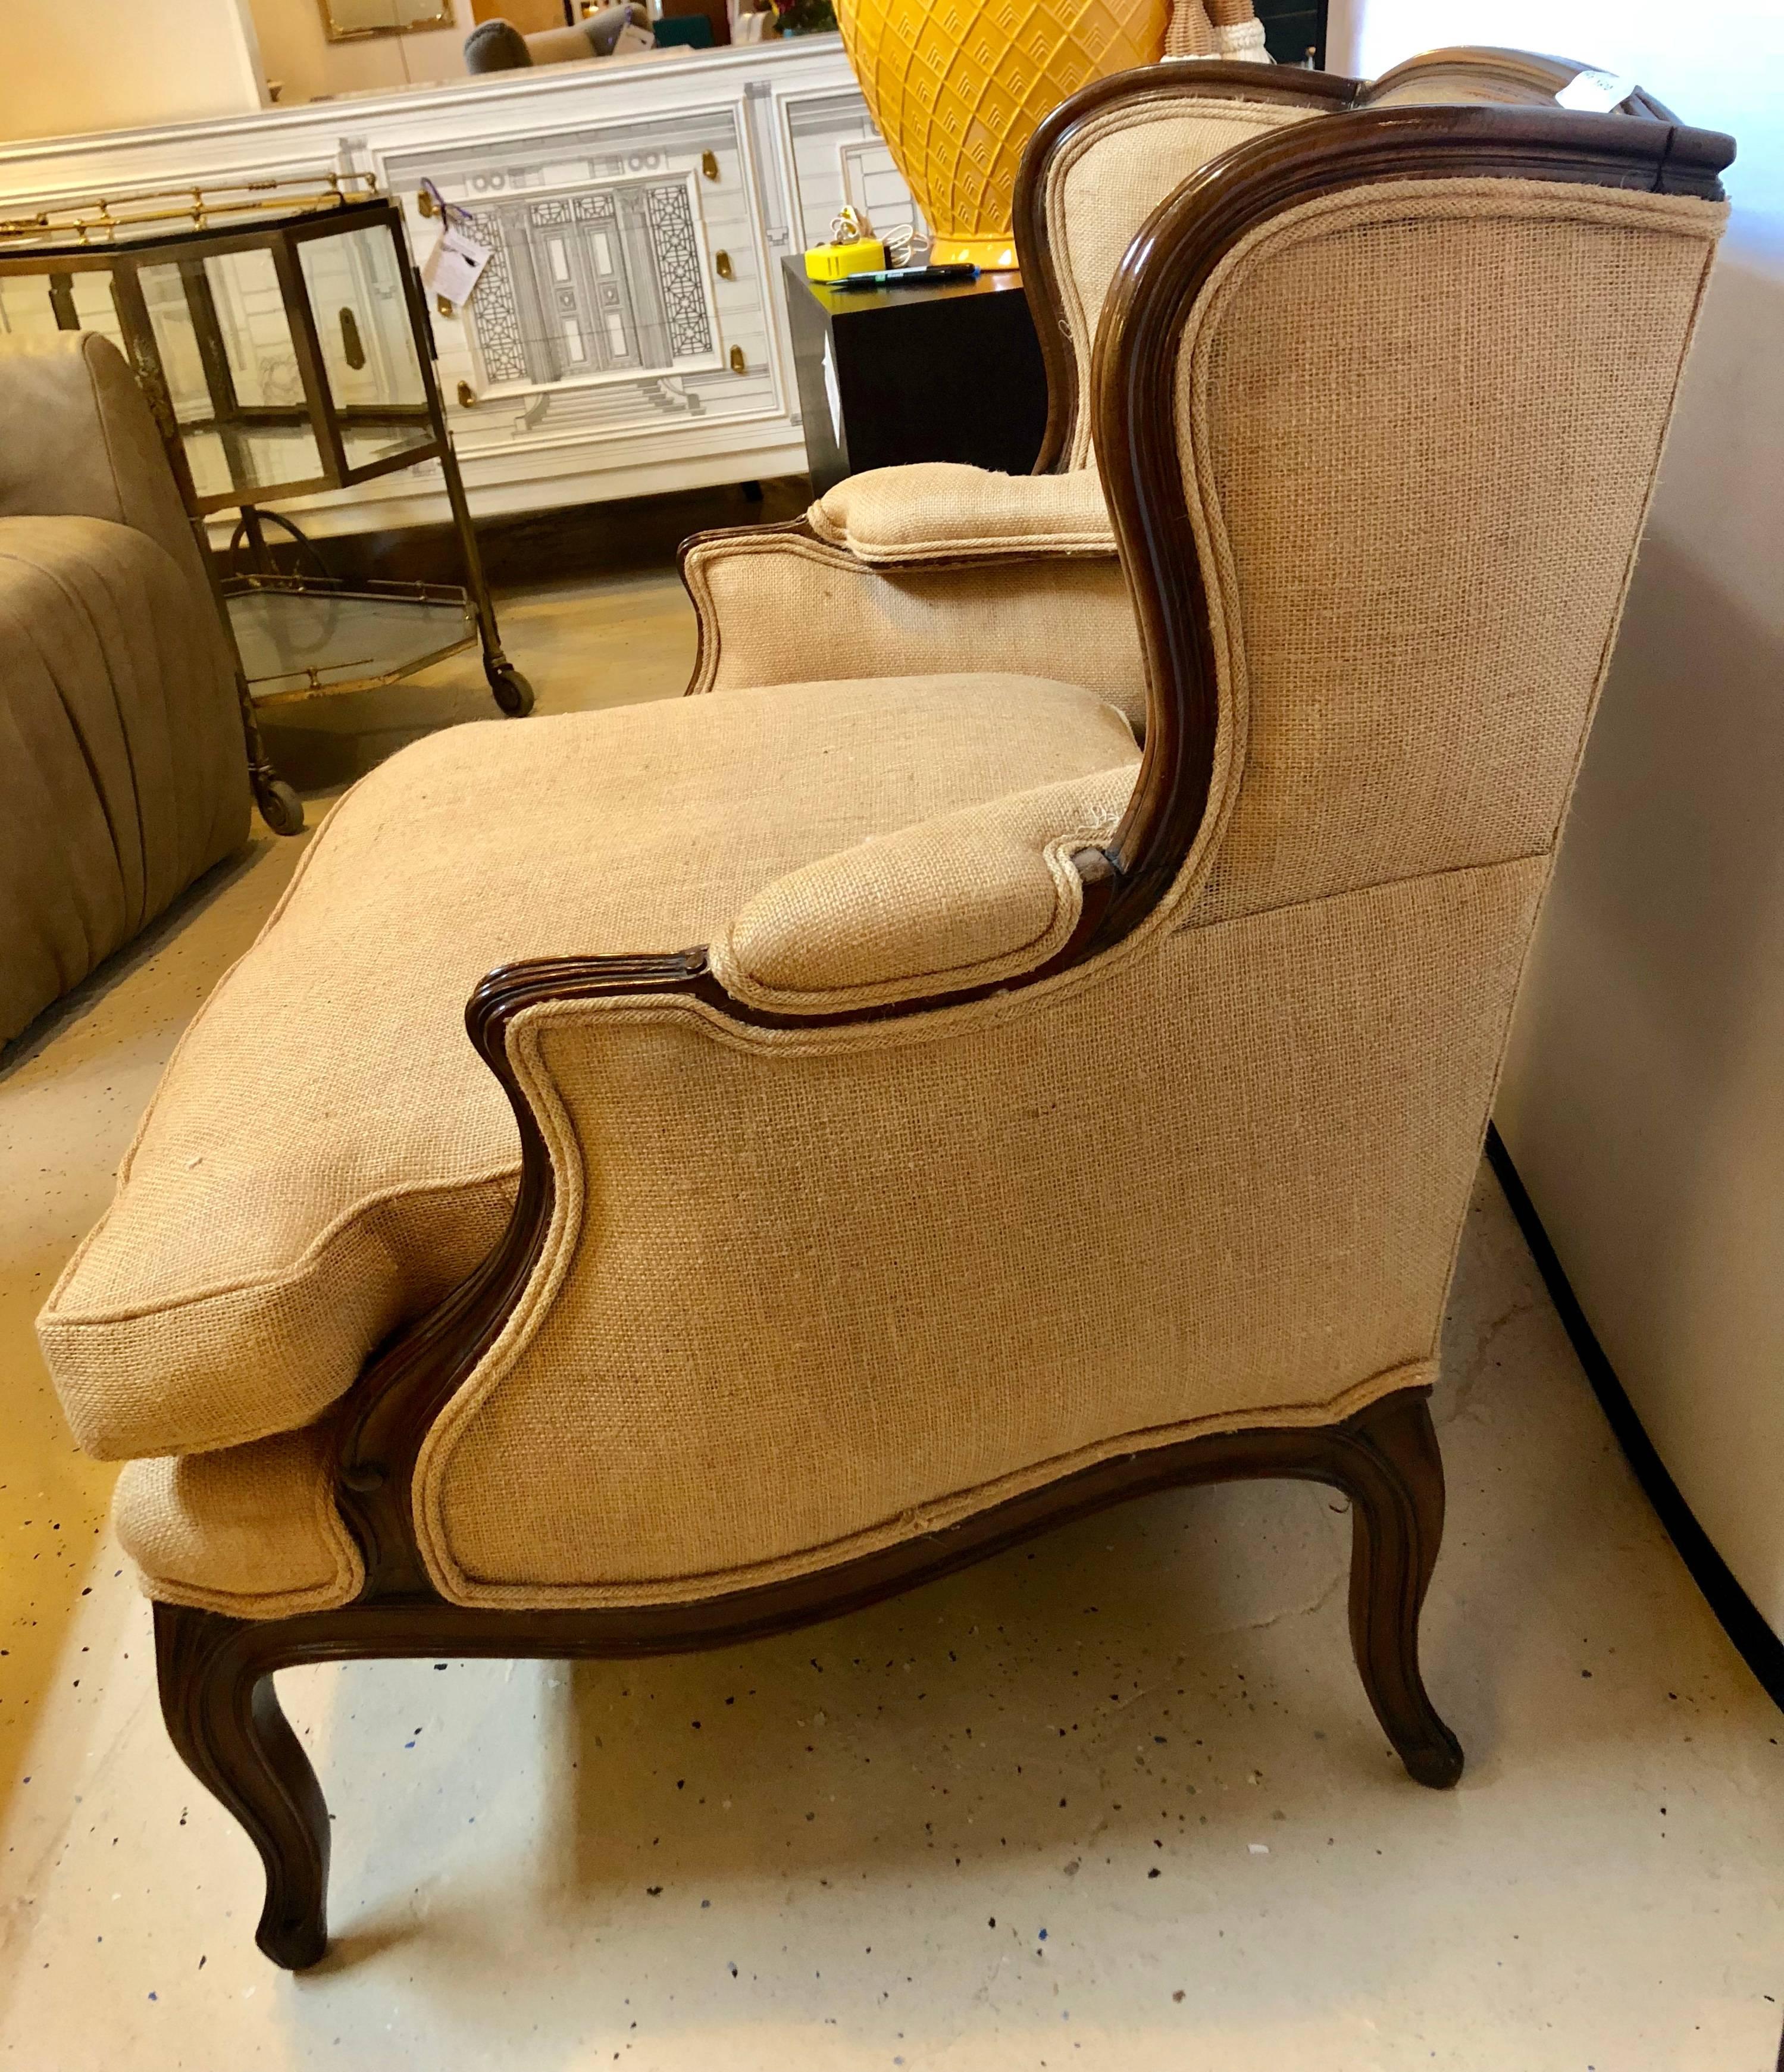 Oversized Wingback Marquis Chair Upholstered in Burlap Carved Wood Details 1